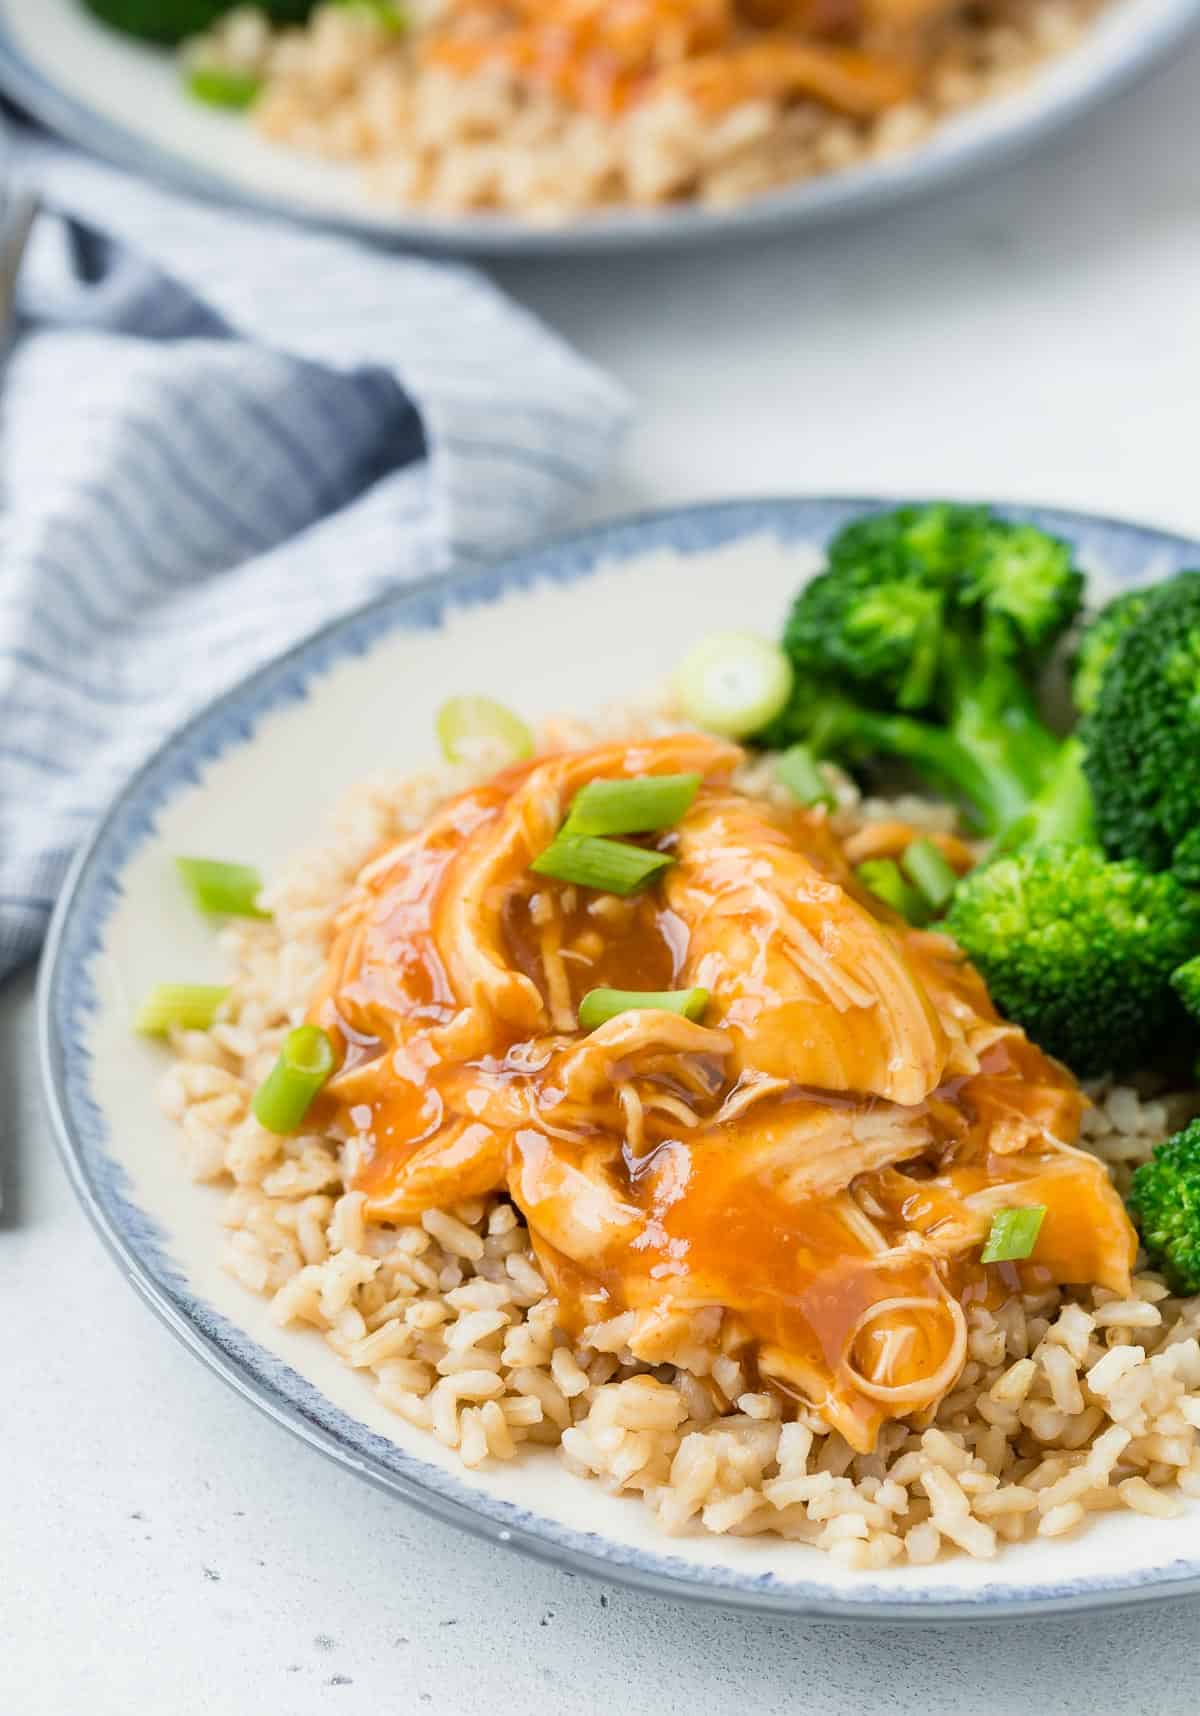 Honey sriracha chicken served over rice with a side of broccoli.